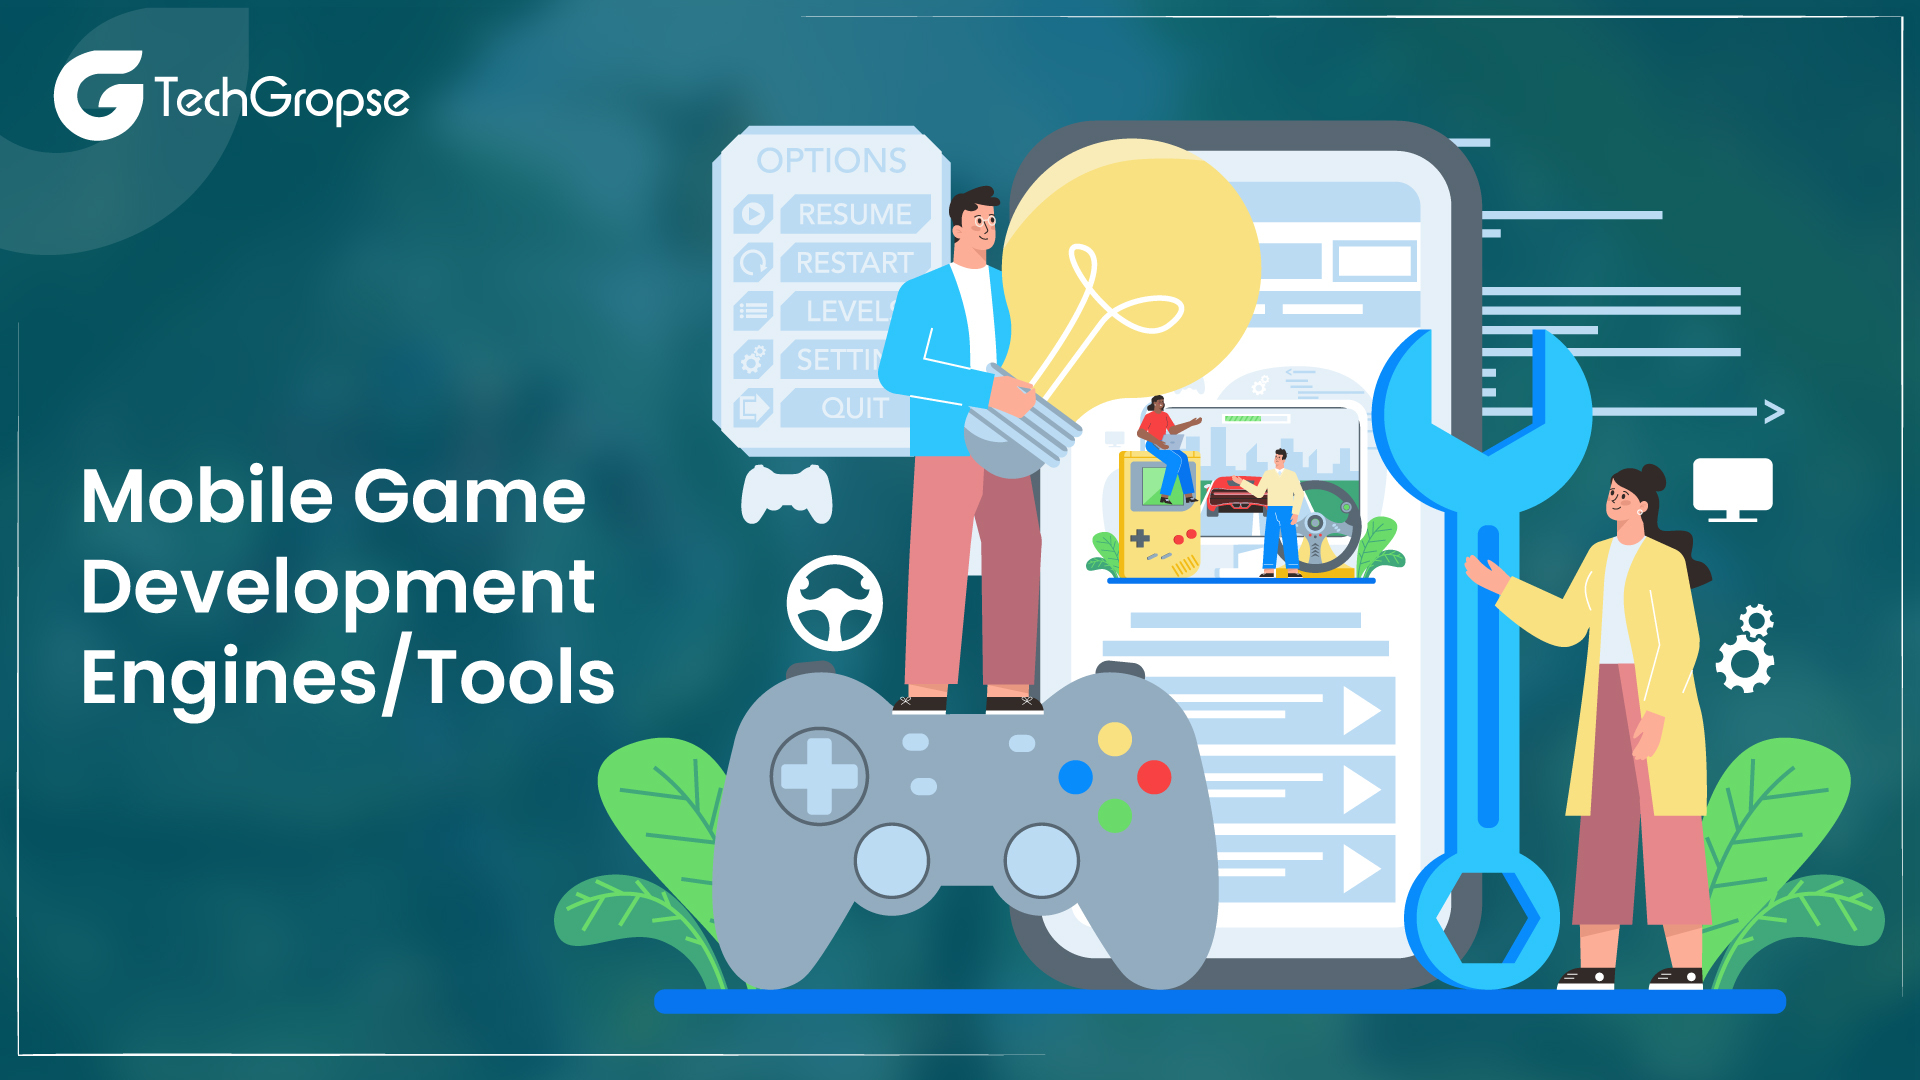 Mobile Game Development Engines/Tools